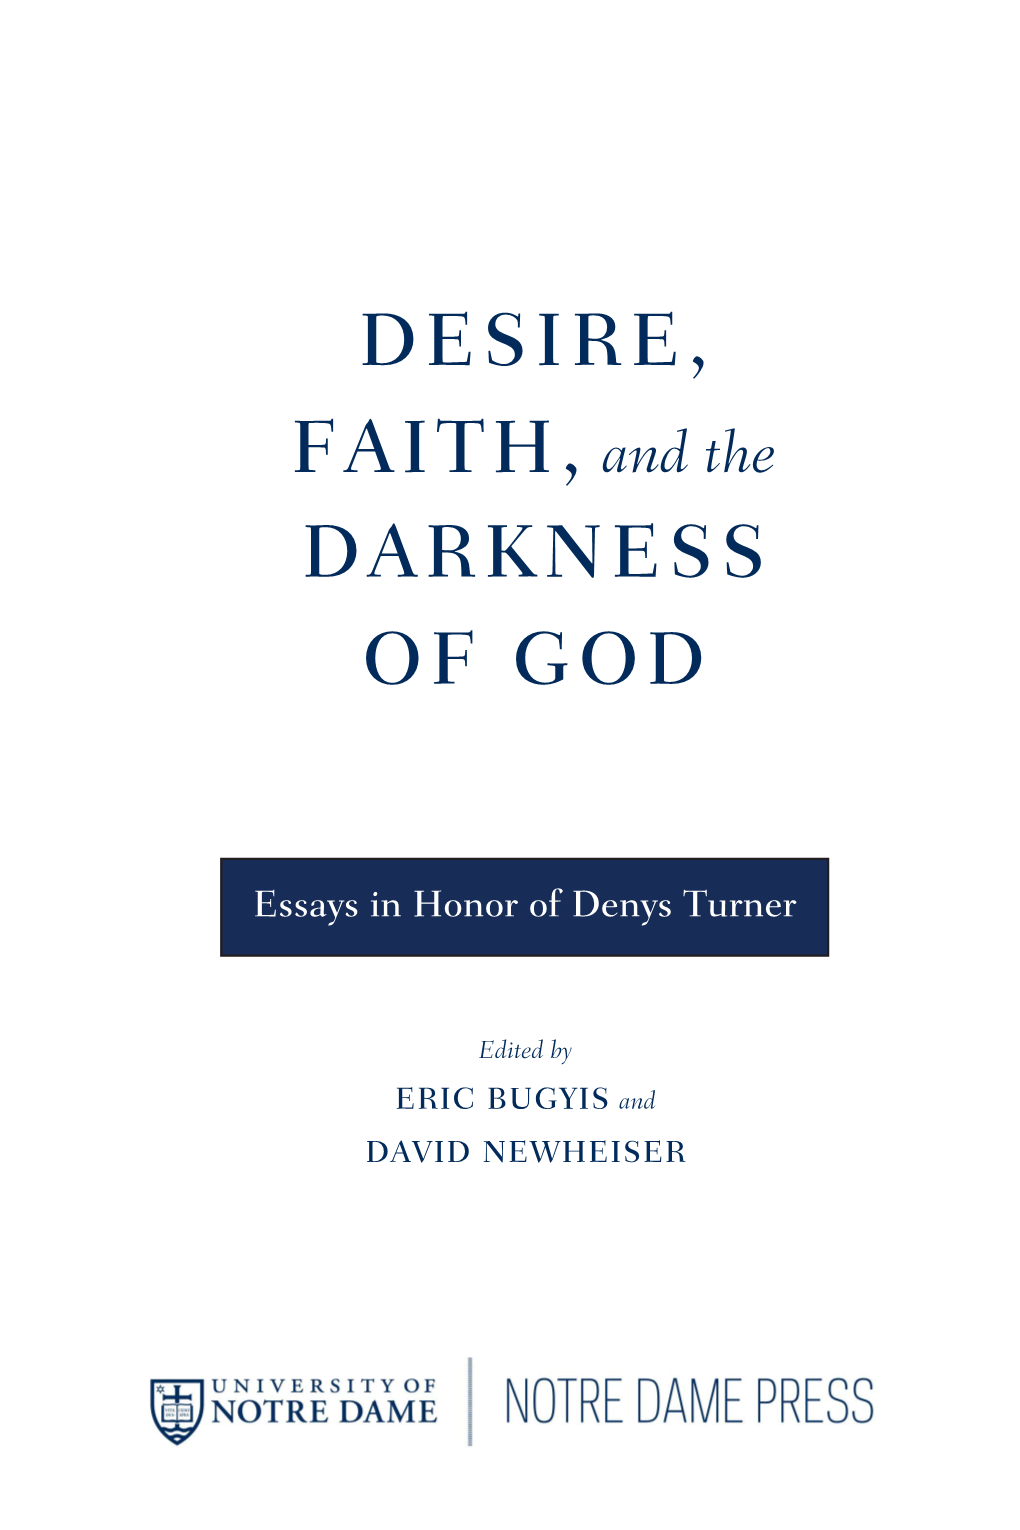 Essays in Honor of Denys Turner